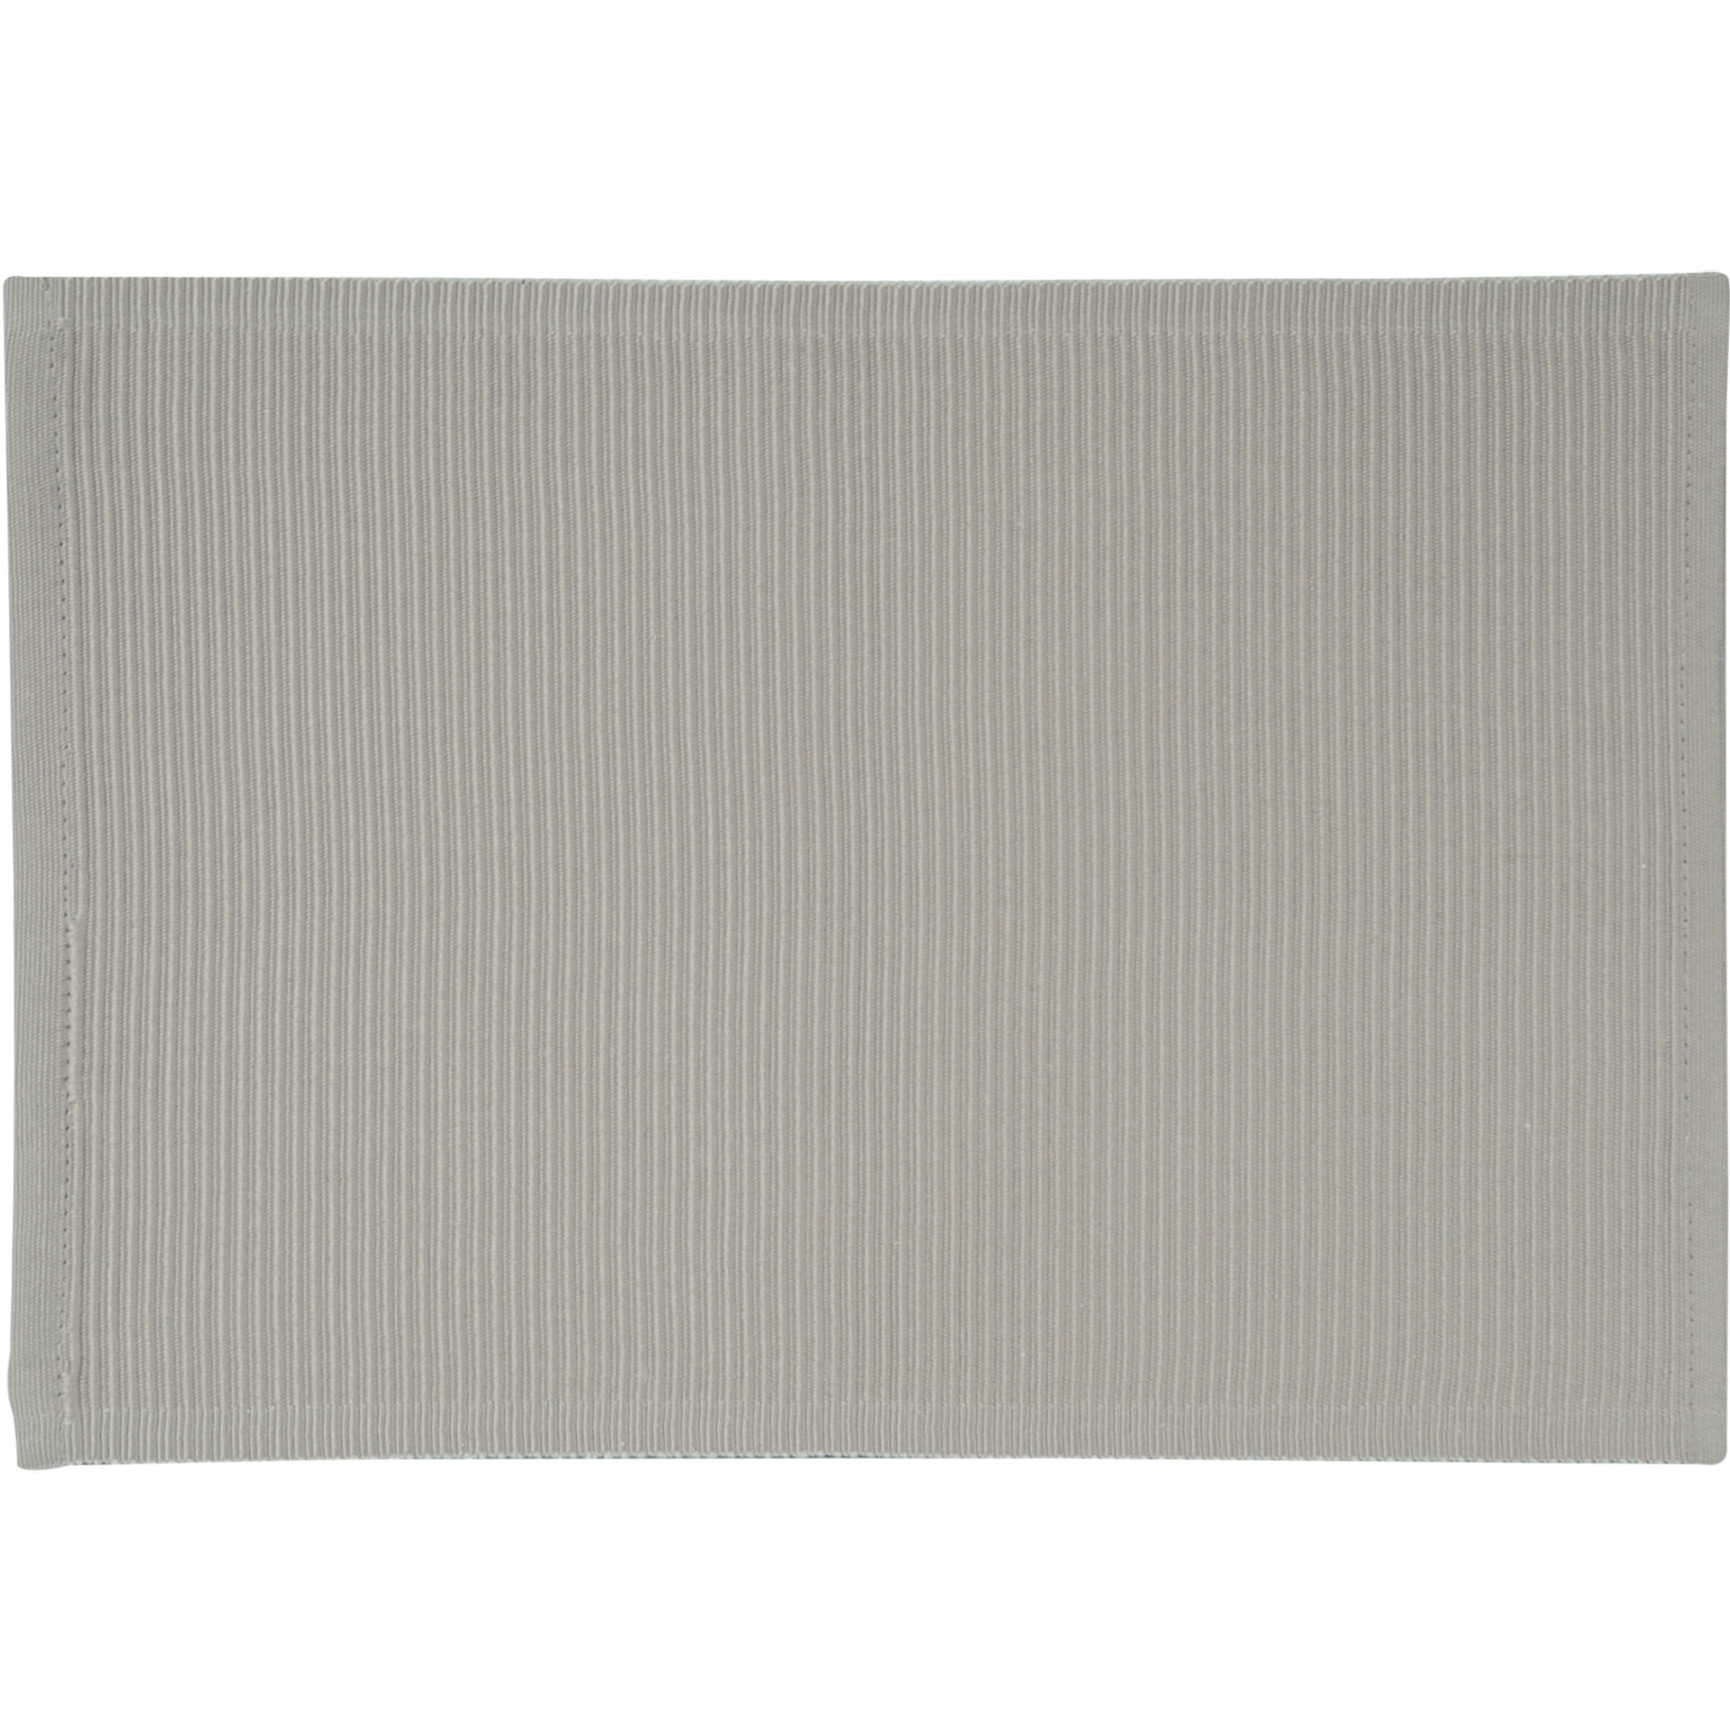 Merkloos 2x Rechthoekige placemats taupe stof 30 x 43 cm -